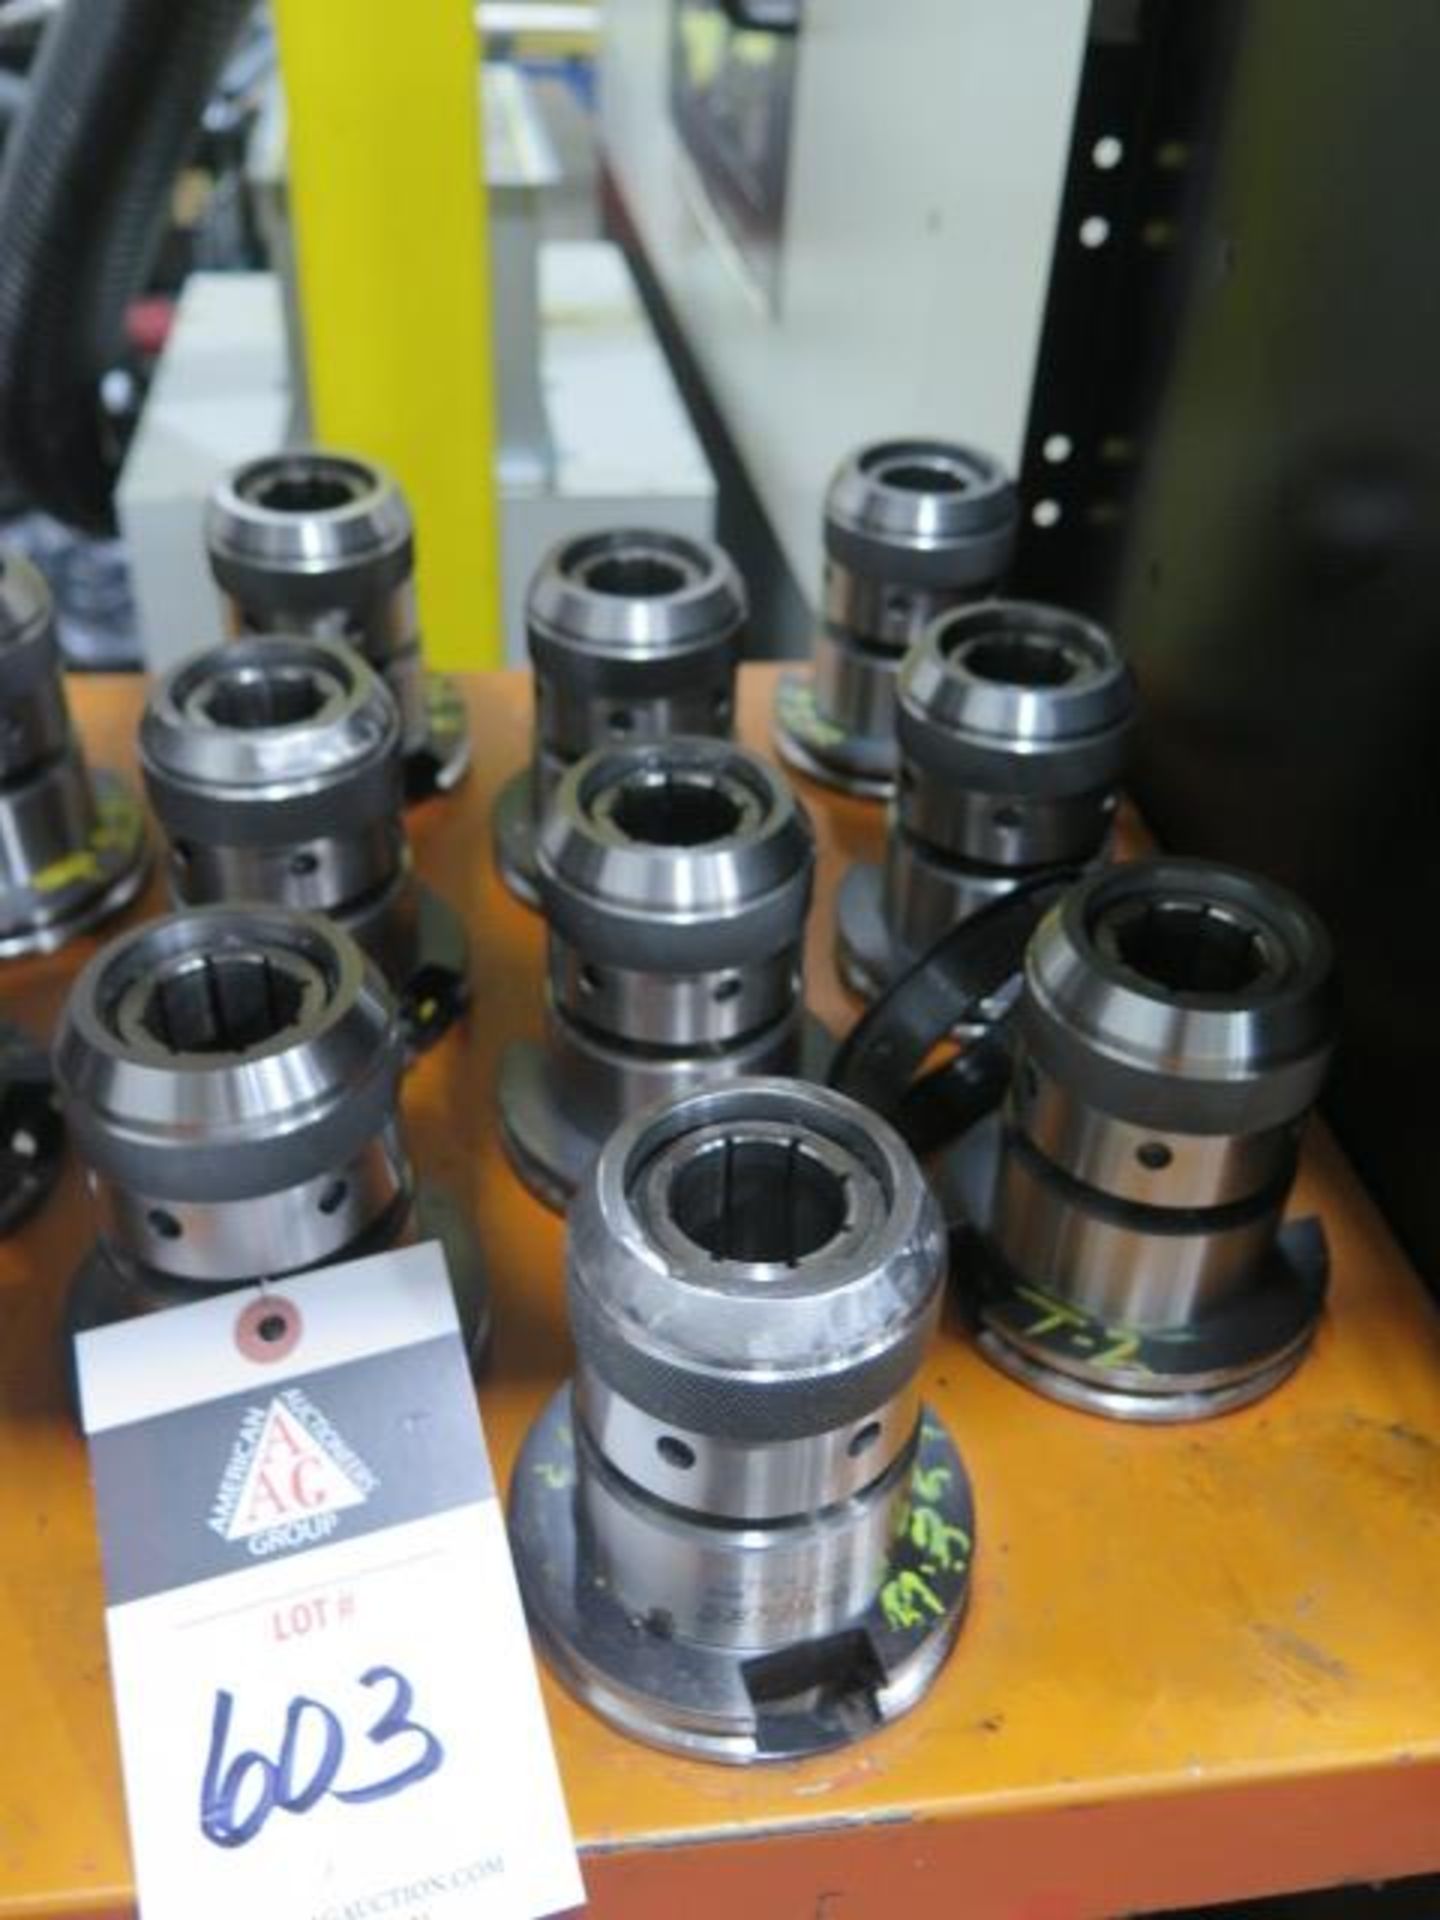 CAT-50 Taper 1 1/4" Straight-Collet Collet Chucks (9) (SOLD AS-IS - NO WARRANTY)